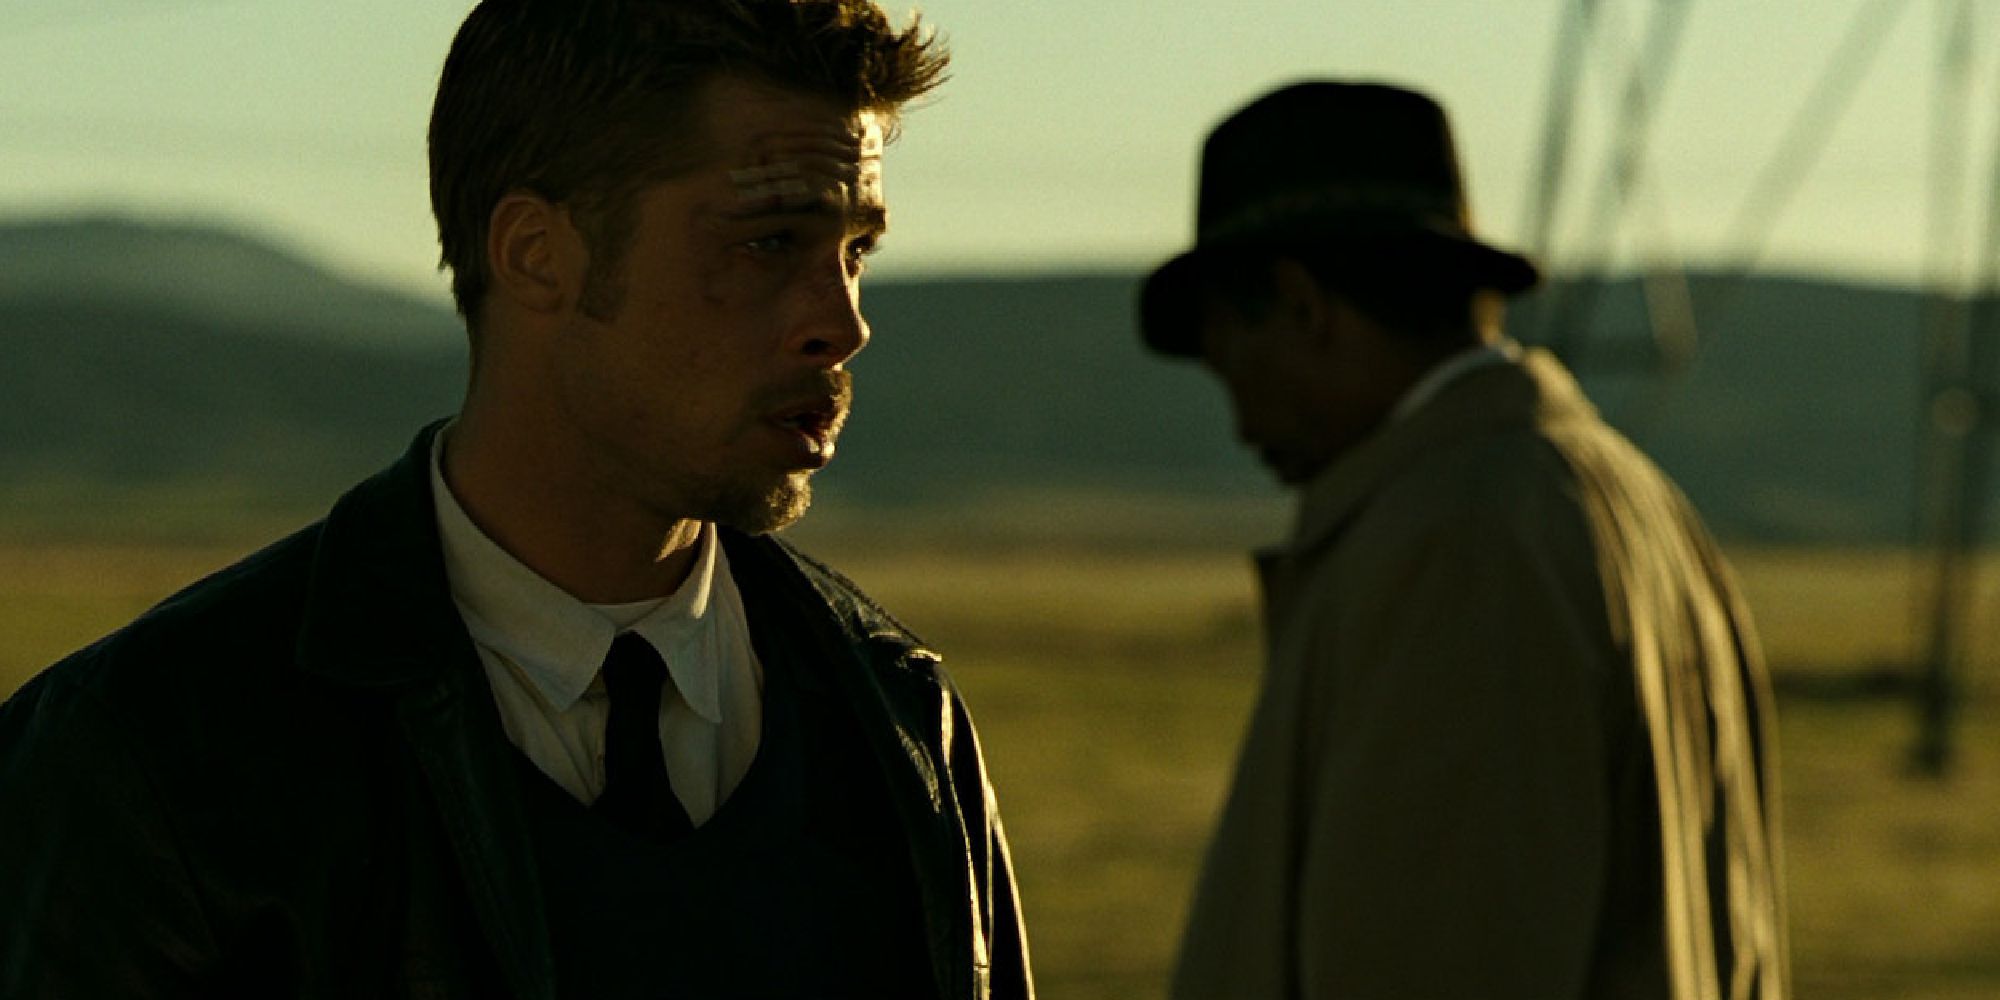 Sergeant Mills (Brad Pitt) looks into the distance distraught as he stands in a large field at sunset.